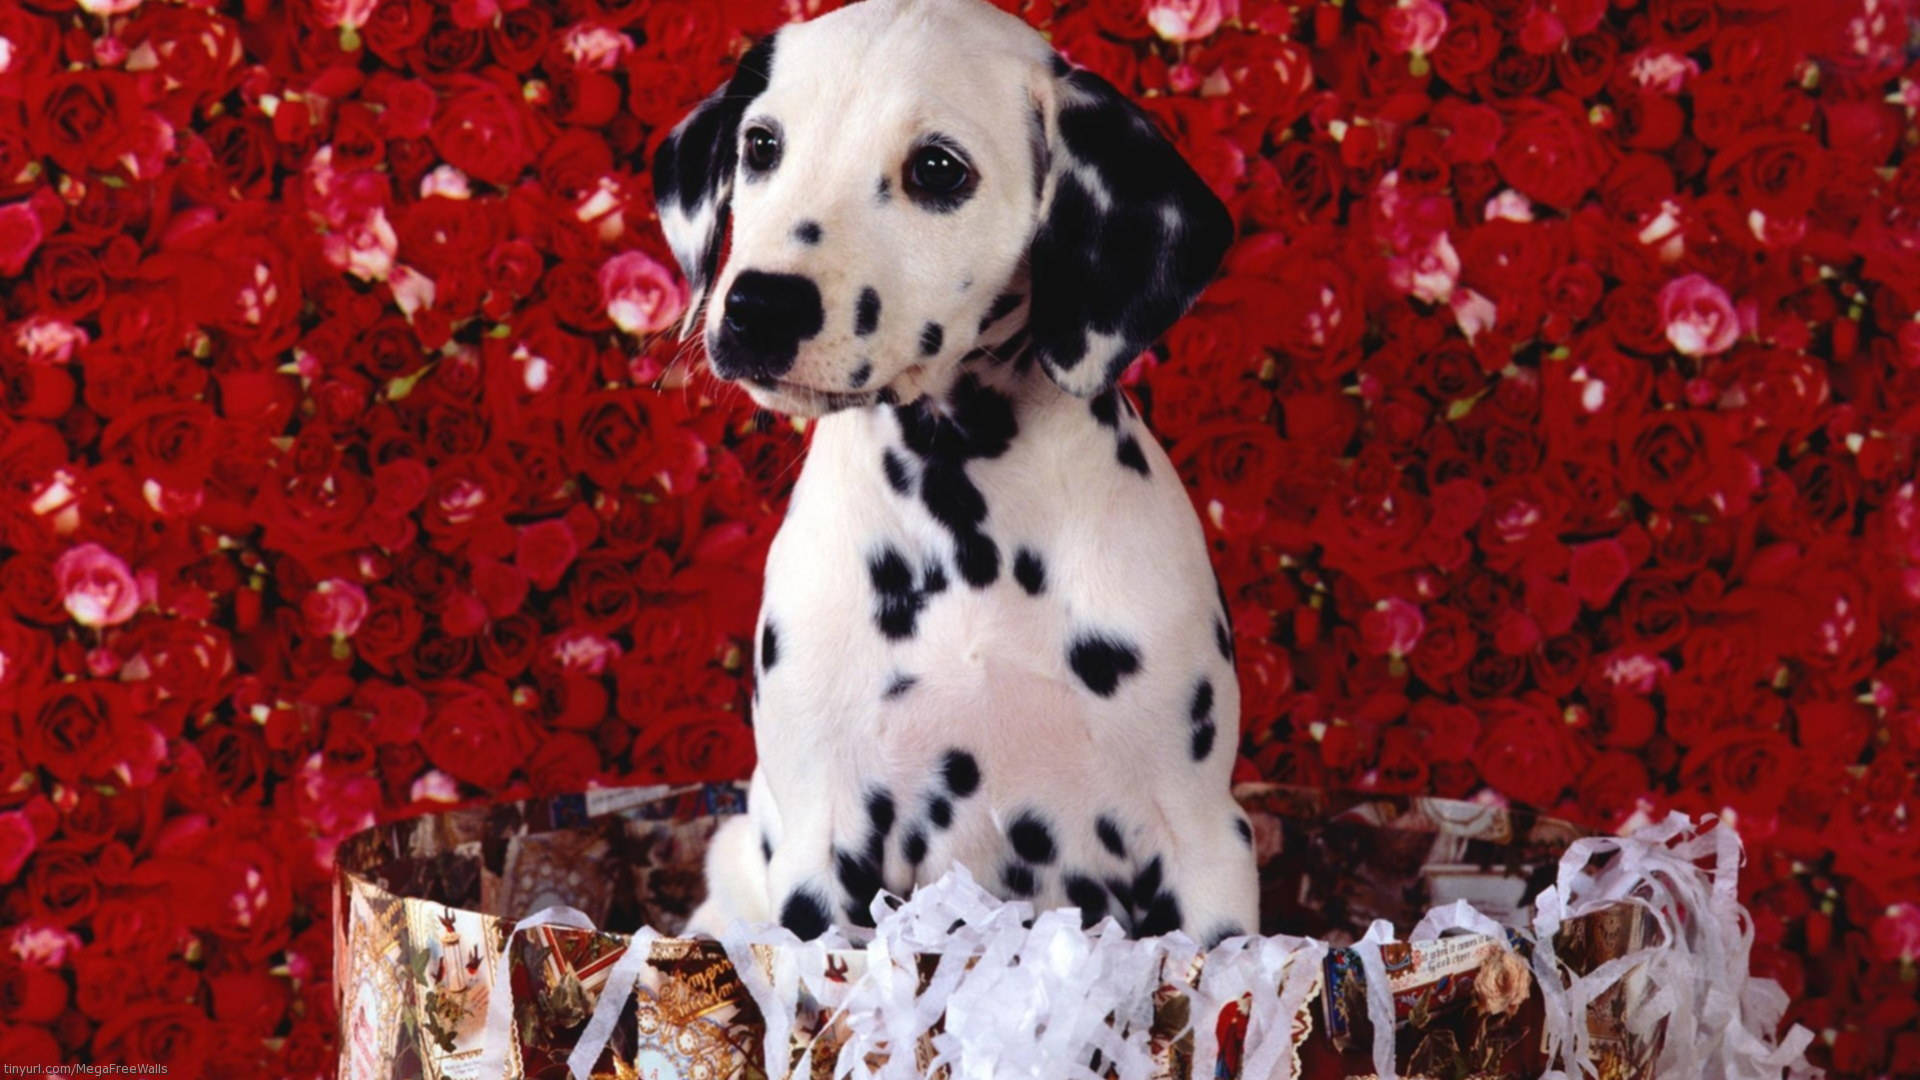 Cute Dalmatian Puppy On Red Roses